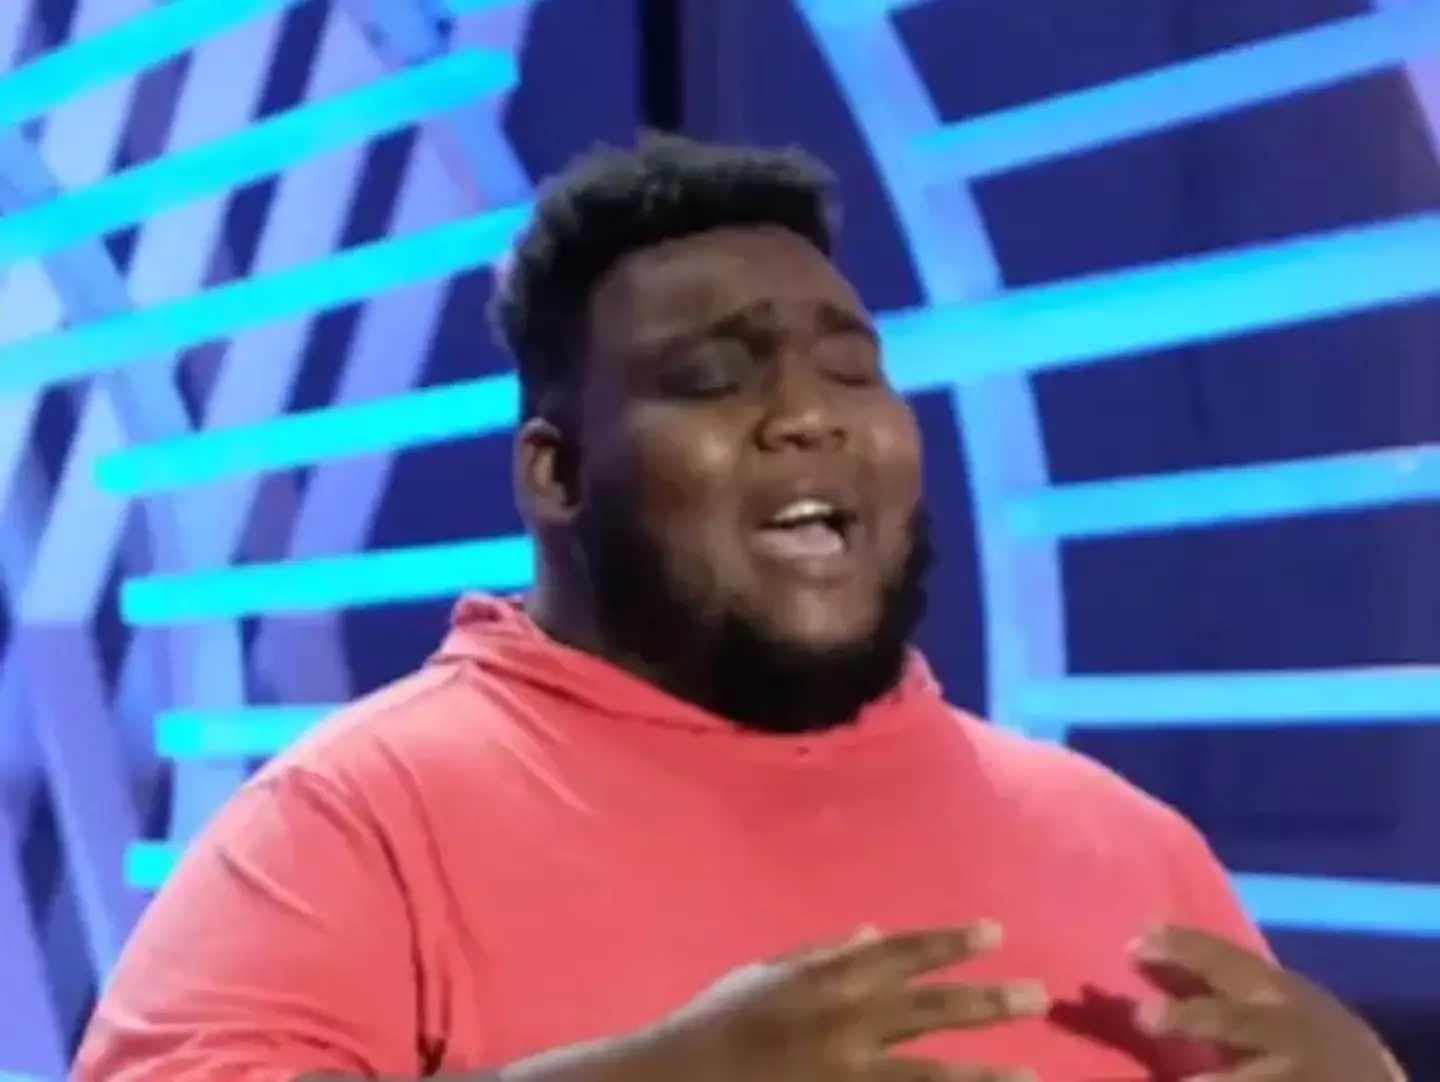 American Idol runner-up Willie Spence has died at the age of 23, according to reports.